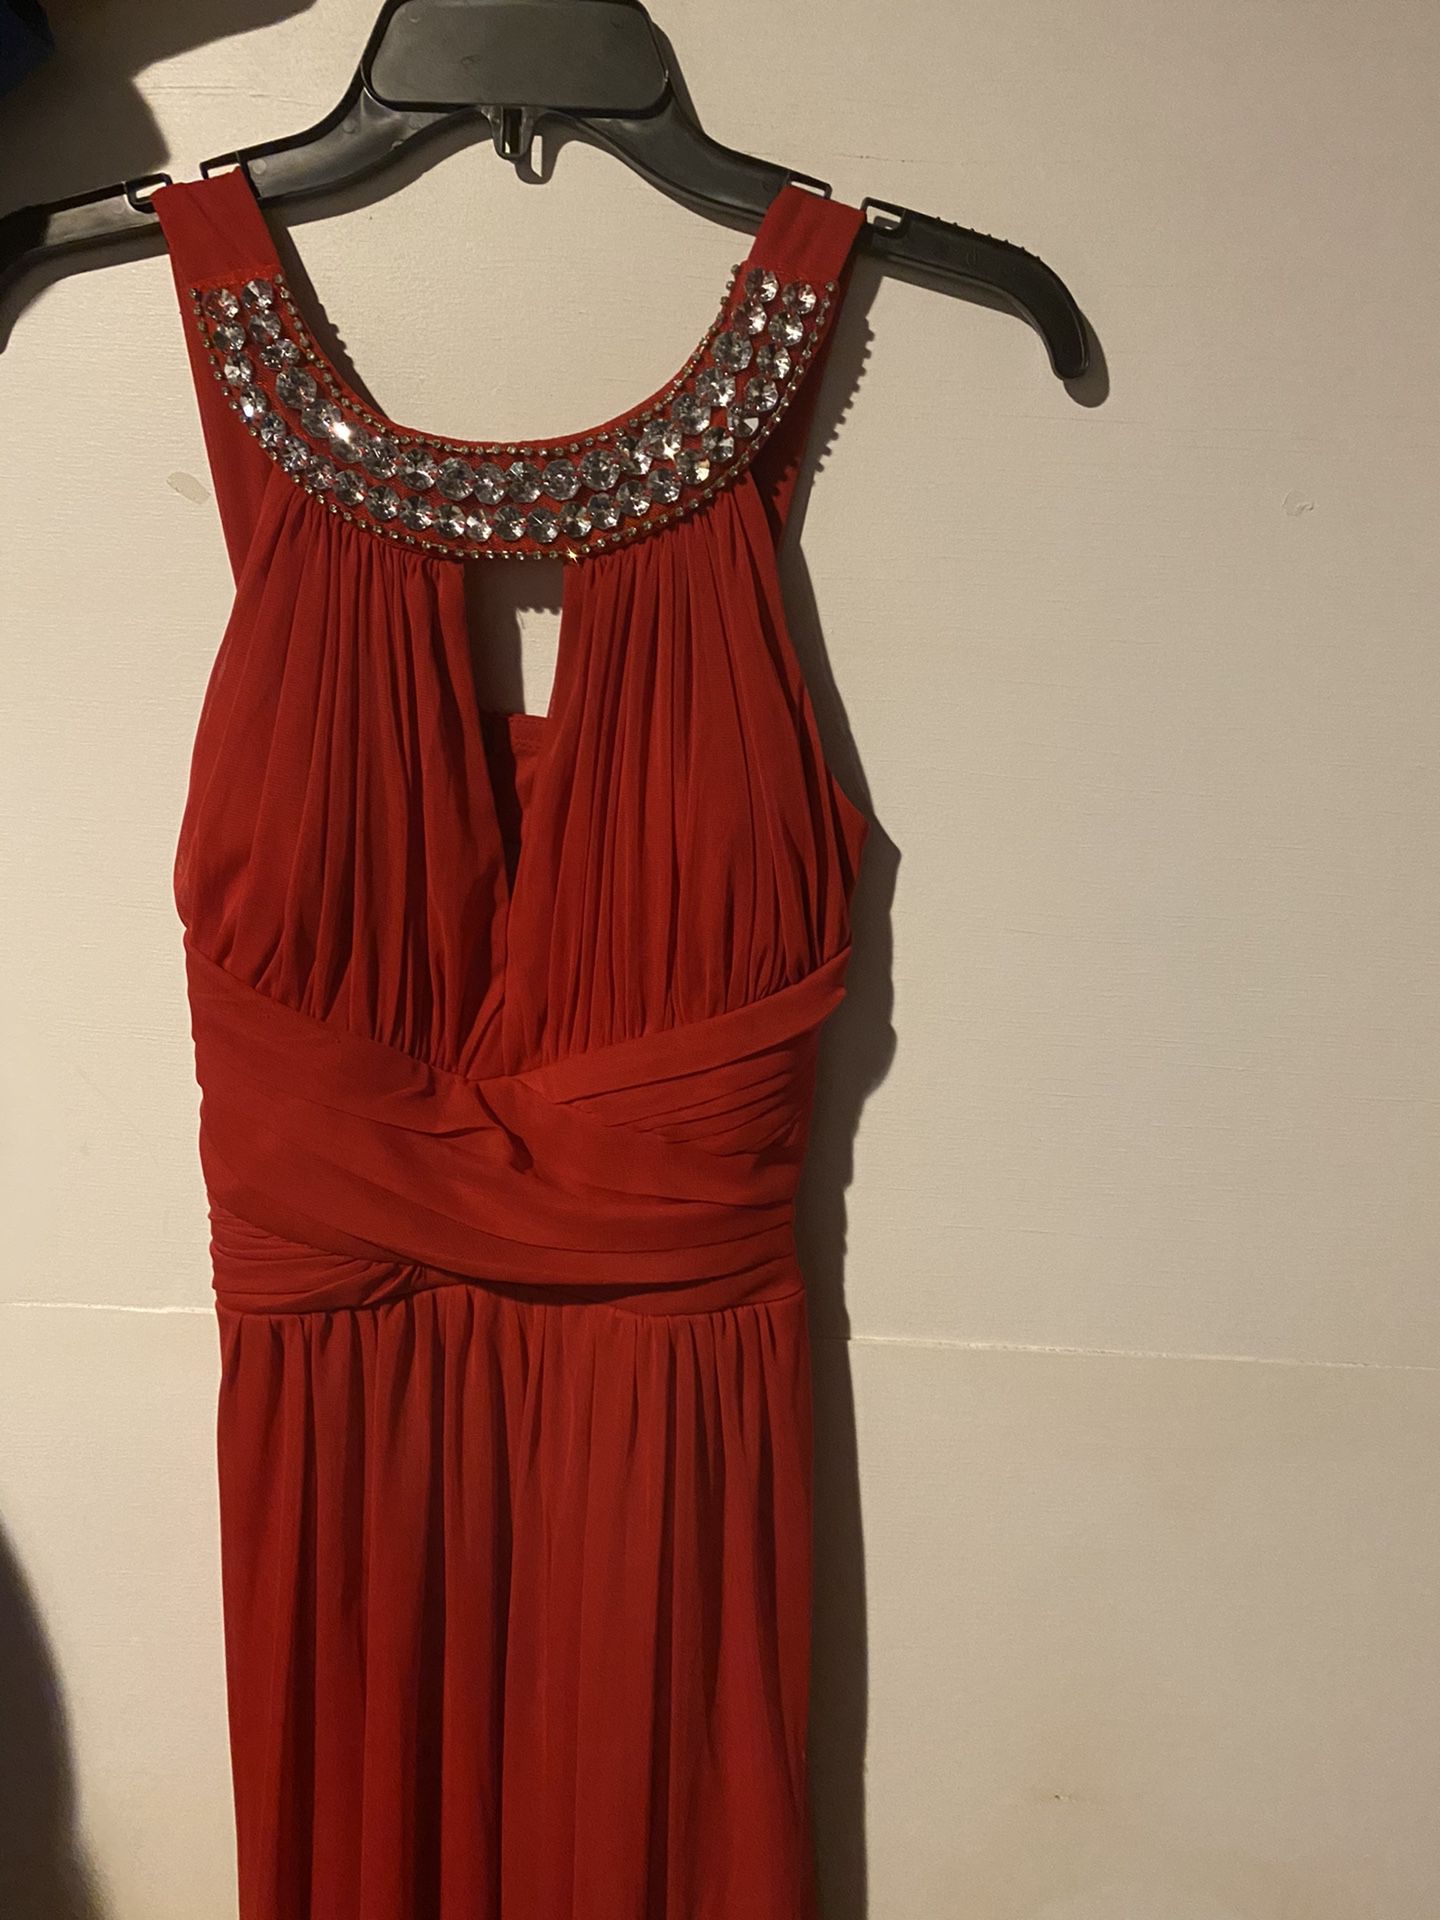 Elegant red dress. Only worn once then laundered and stored in clothing bag since.